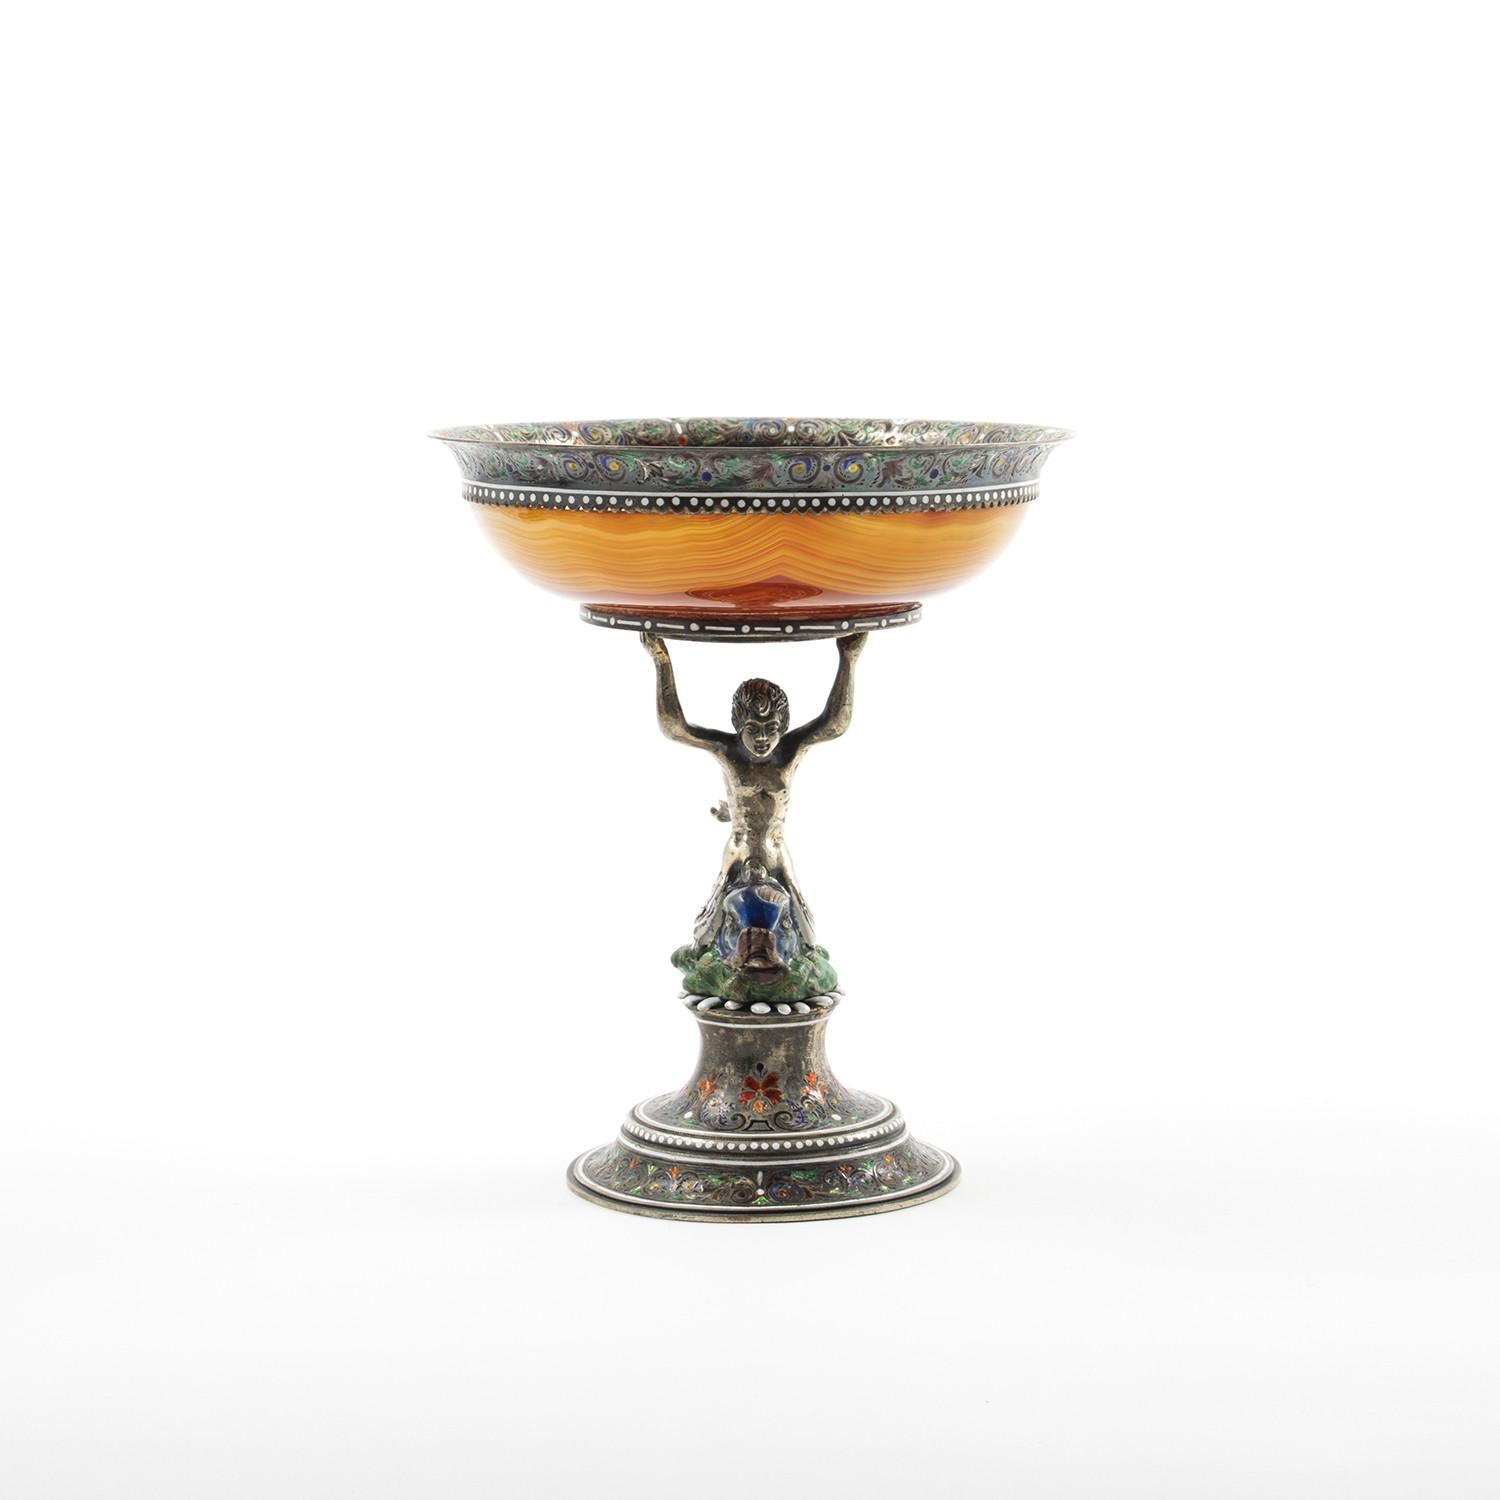 German Art Nouveau Sterling Silver Mounted Agate Caviar Server by J.D. Schleissner & S.